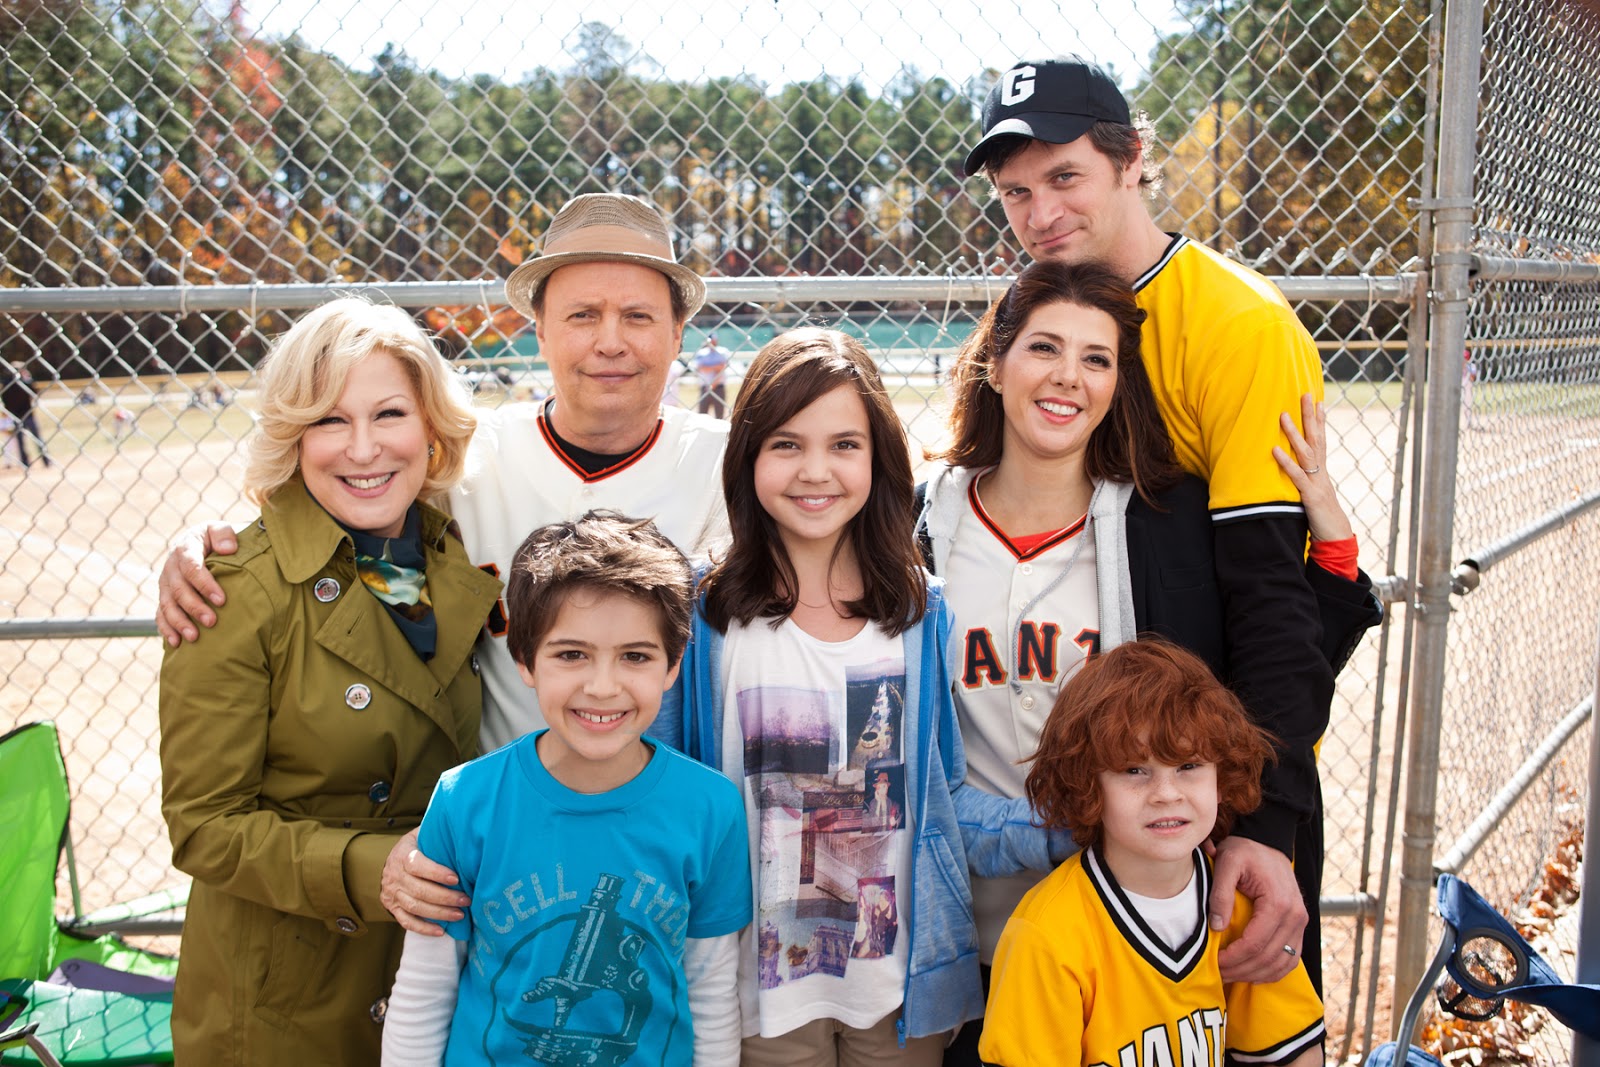 Bailee Madison in Parental Guidance